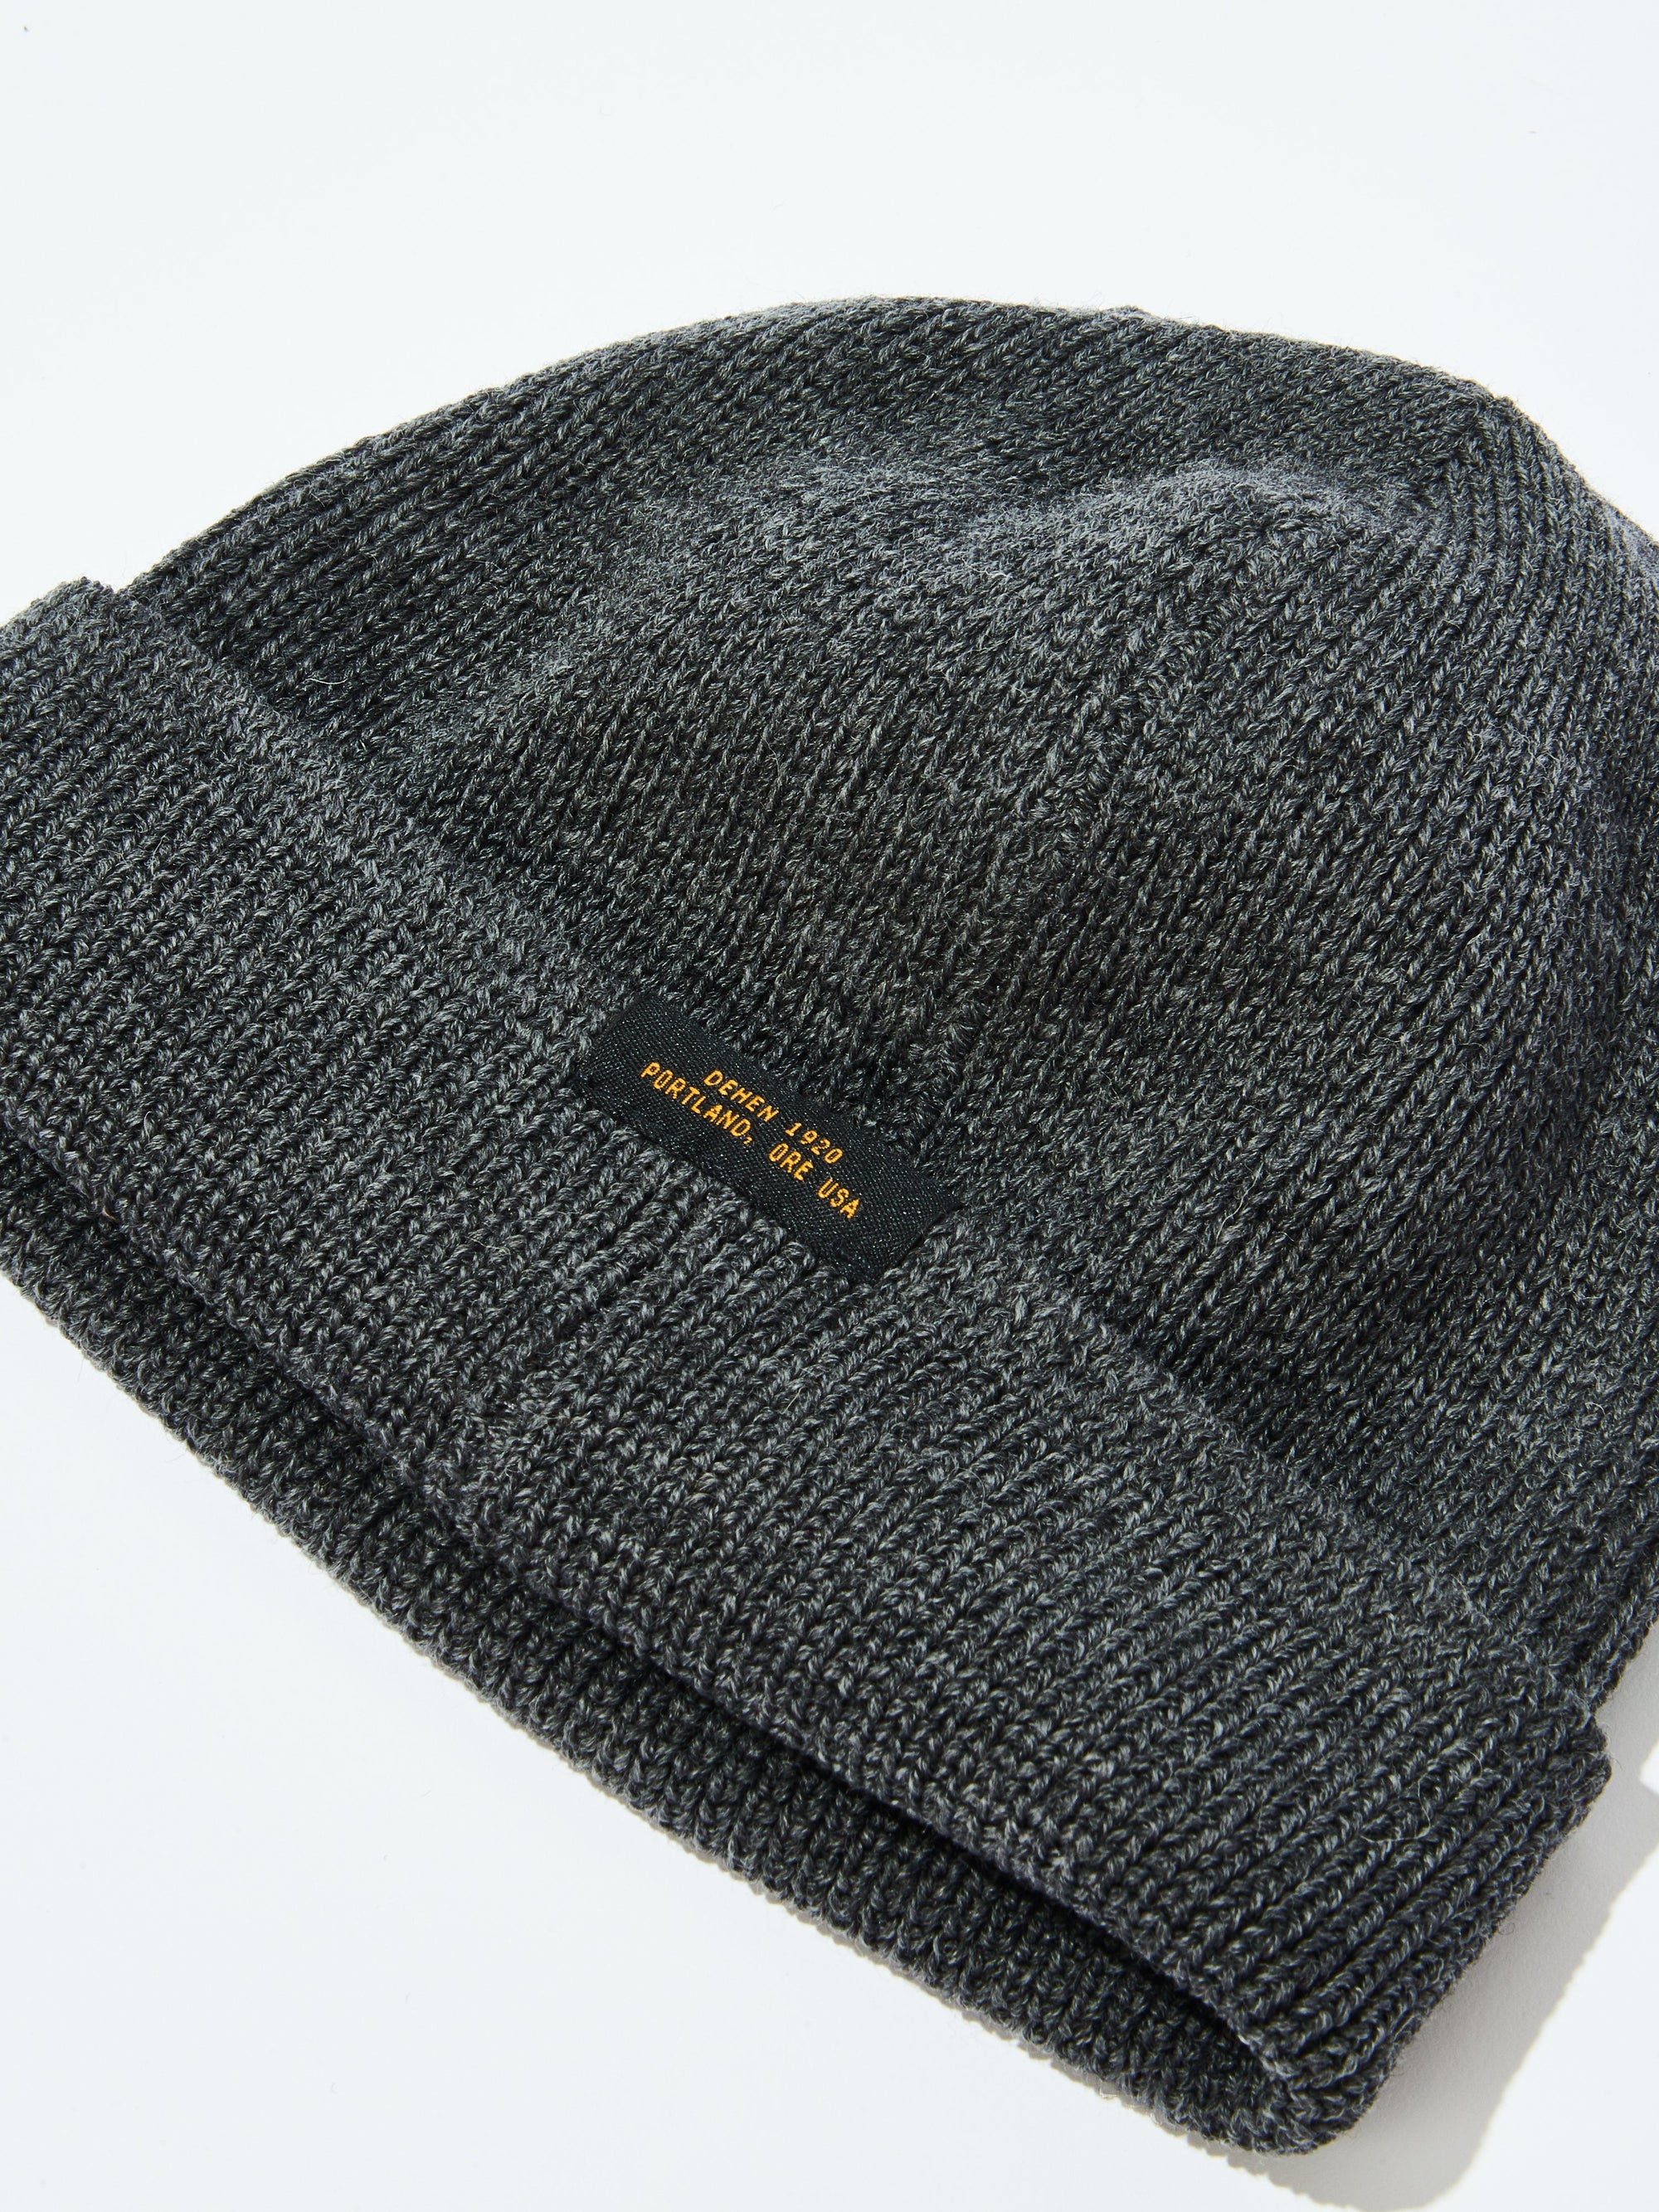 WATCH CAP - handmade 100% recycled polyester double knit short beanie -  CIDER - Winter Hats